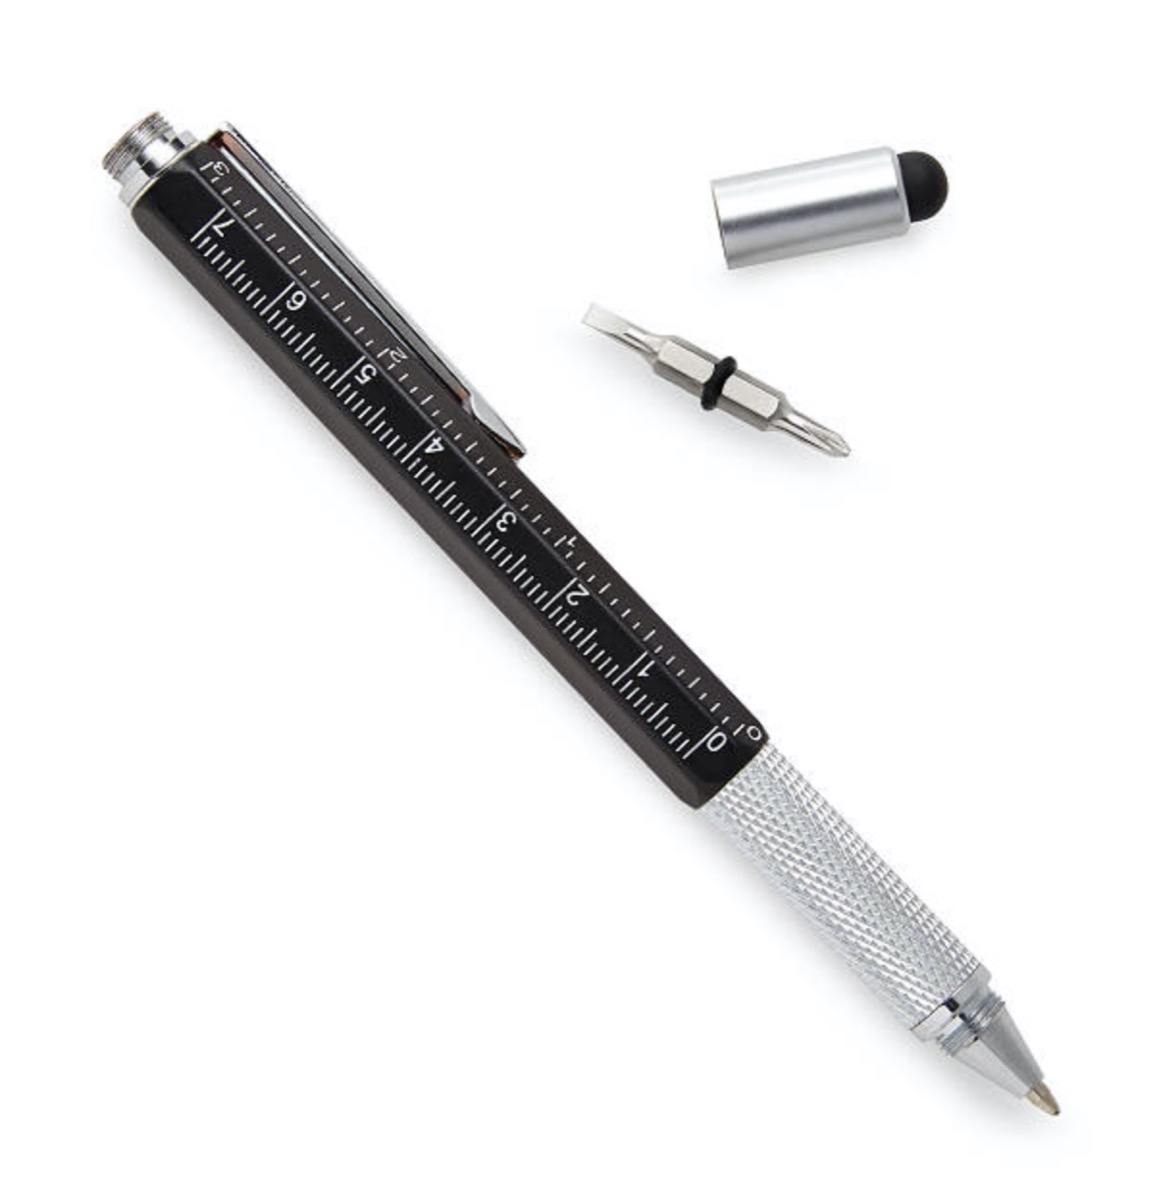 black and silver pen with ruler on the side, a screwdriver head, and a stylus nib